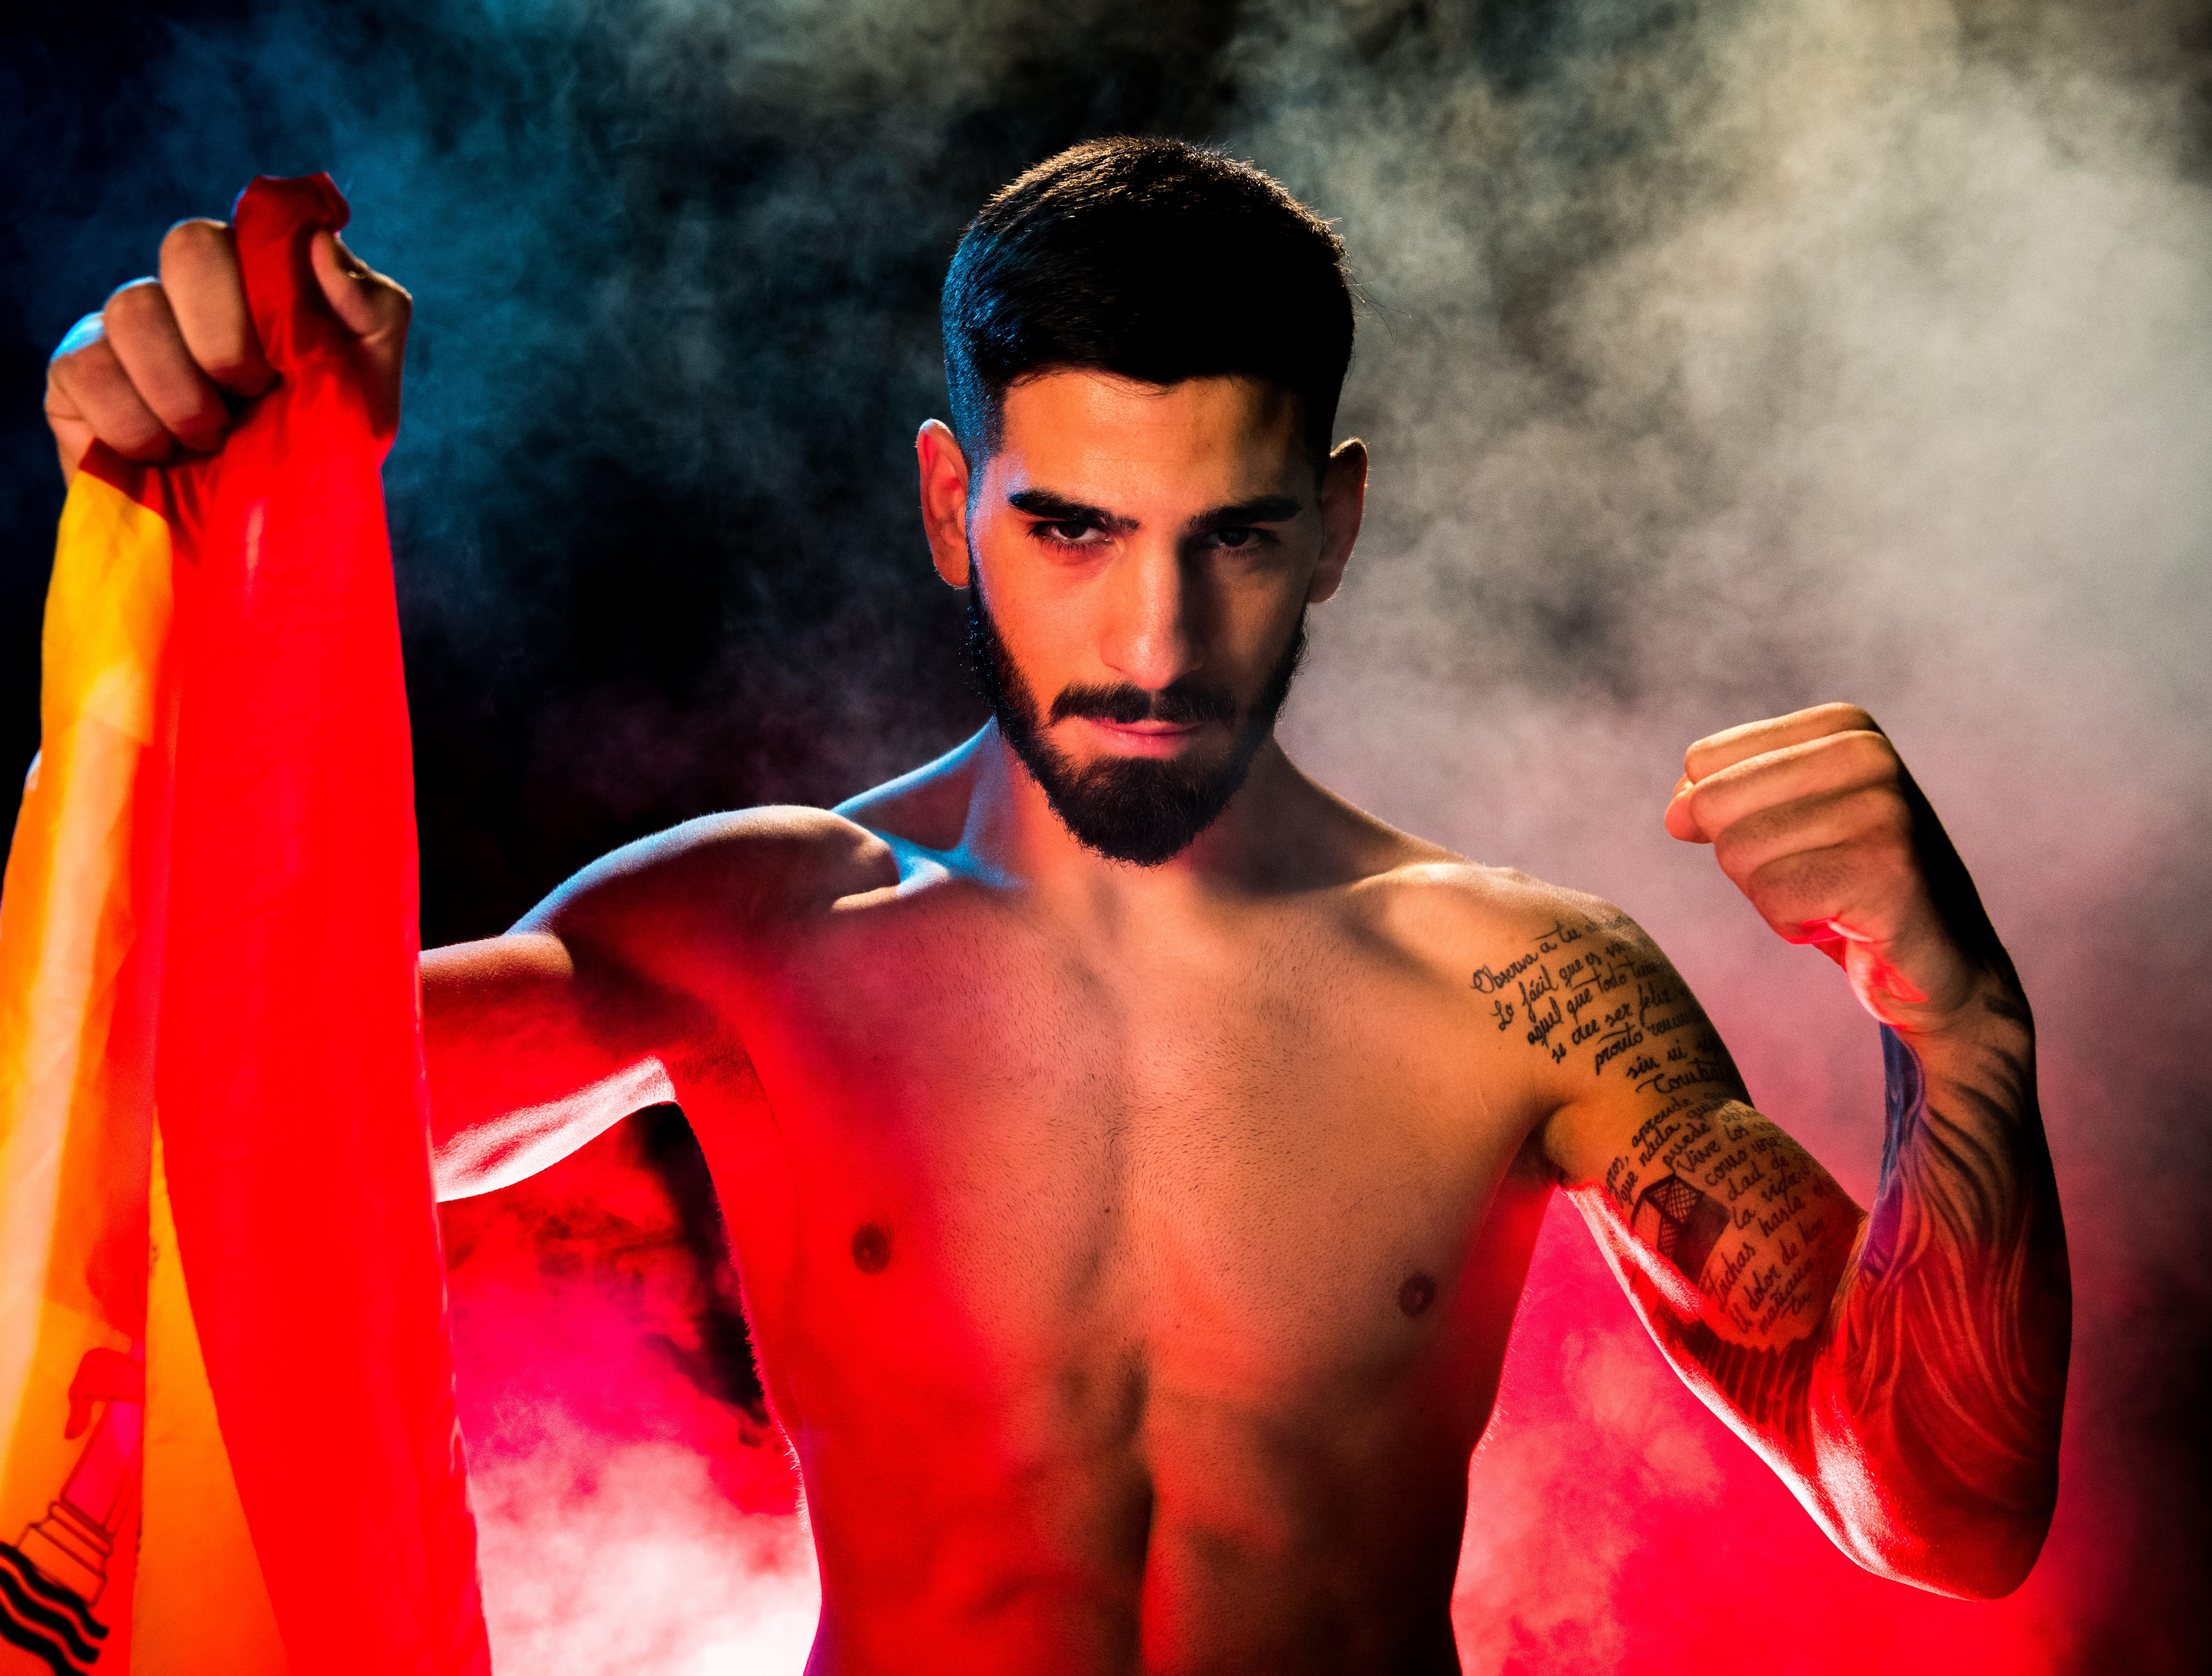 BRAVE CF Live Chats - Ilia Topuria rips "fanboy" Gabriel "Fly", calls for BRAVE CF show in Spain -